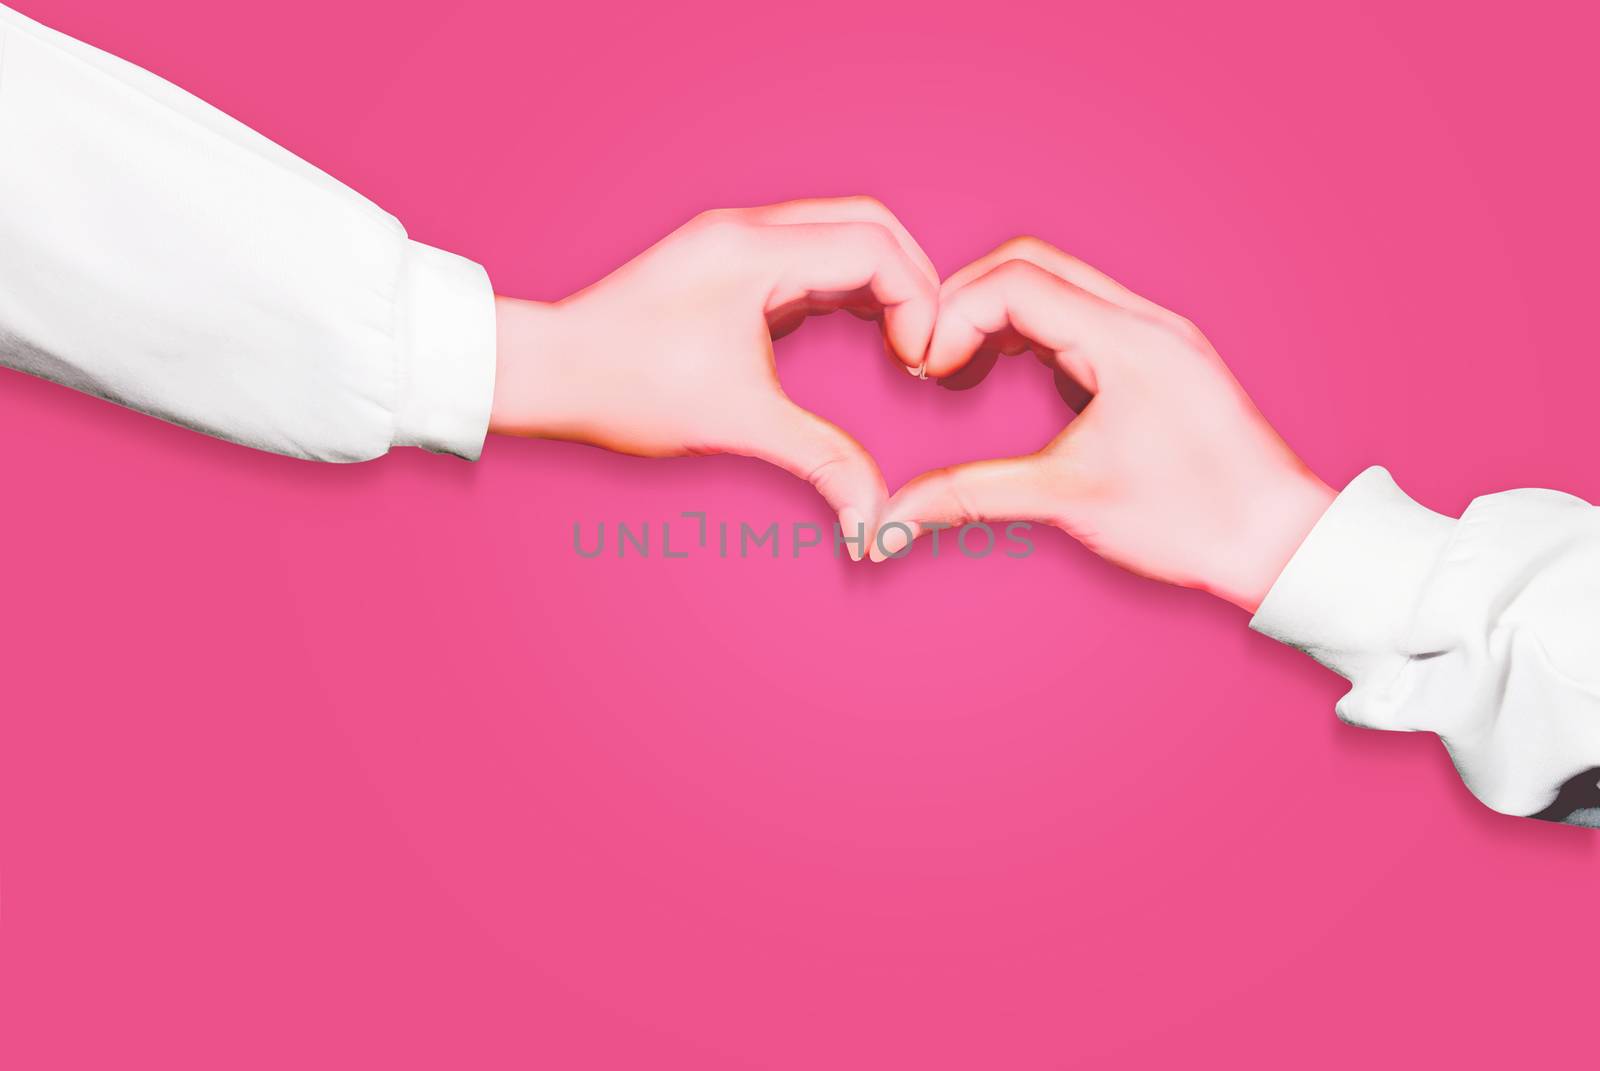 Hands in form of heart isolated on pink background, arms wearing long white sleeves